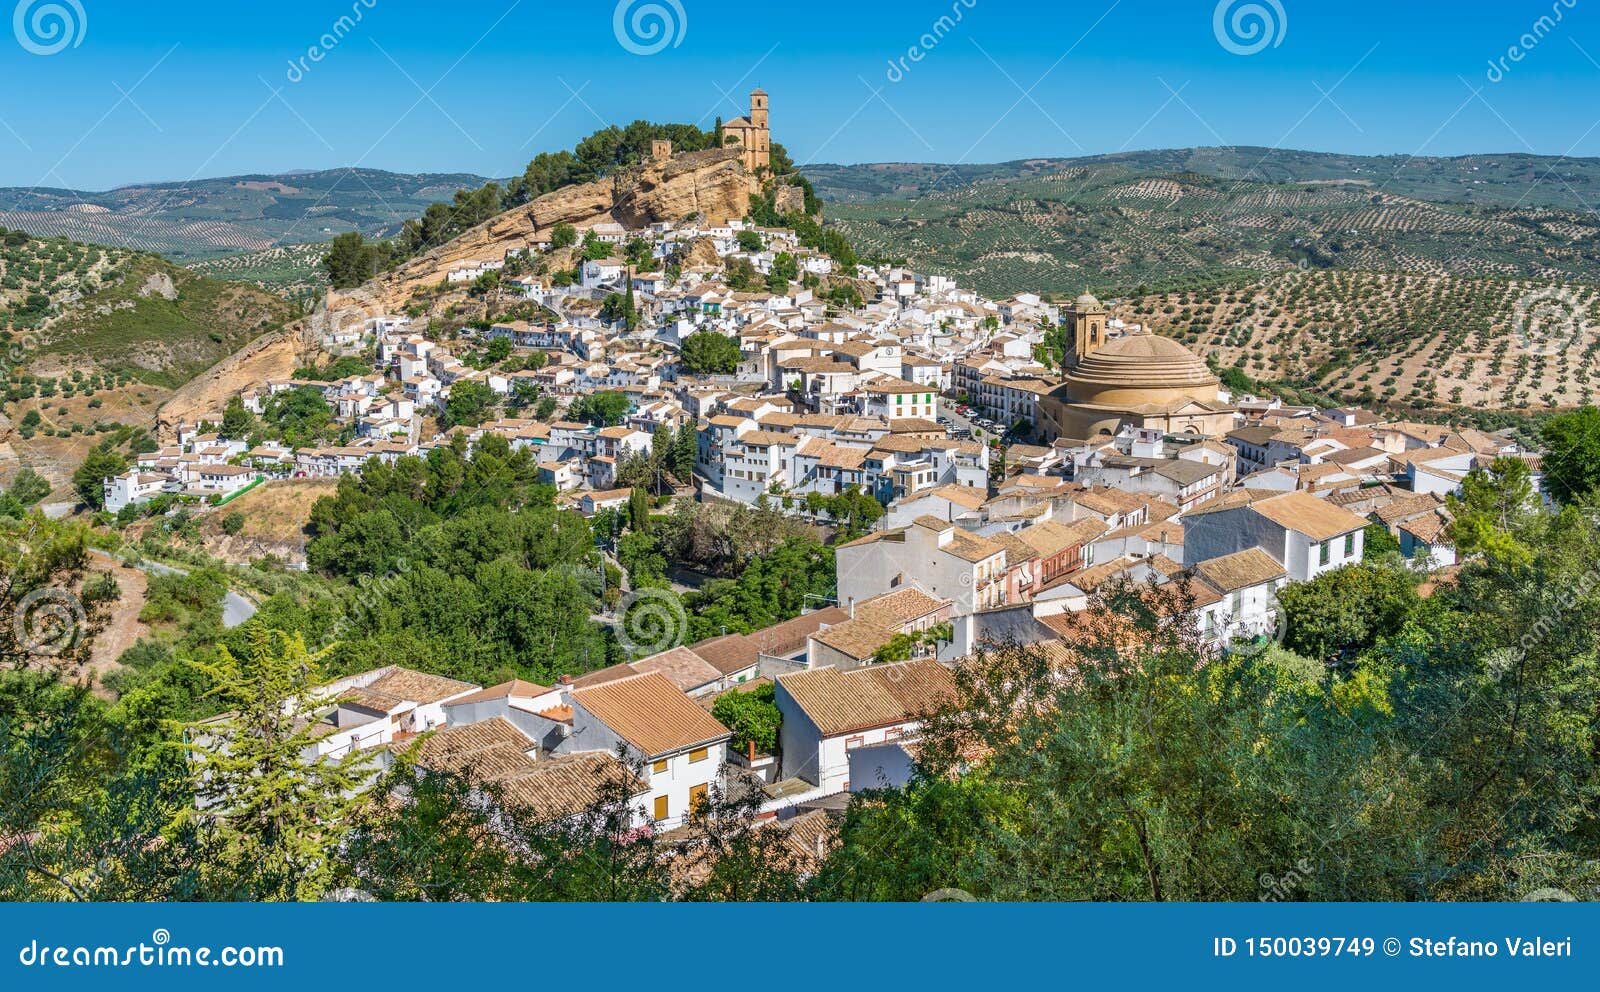 panoramic sight in montefrio, beautiful village in the province of granada, andalusia, spain.